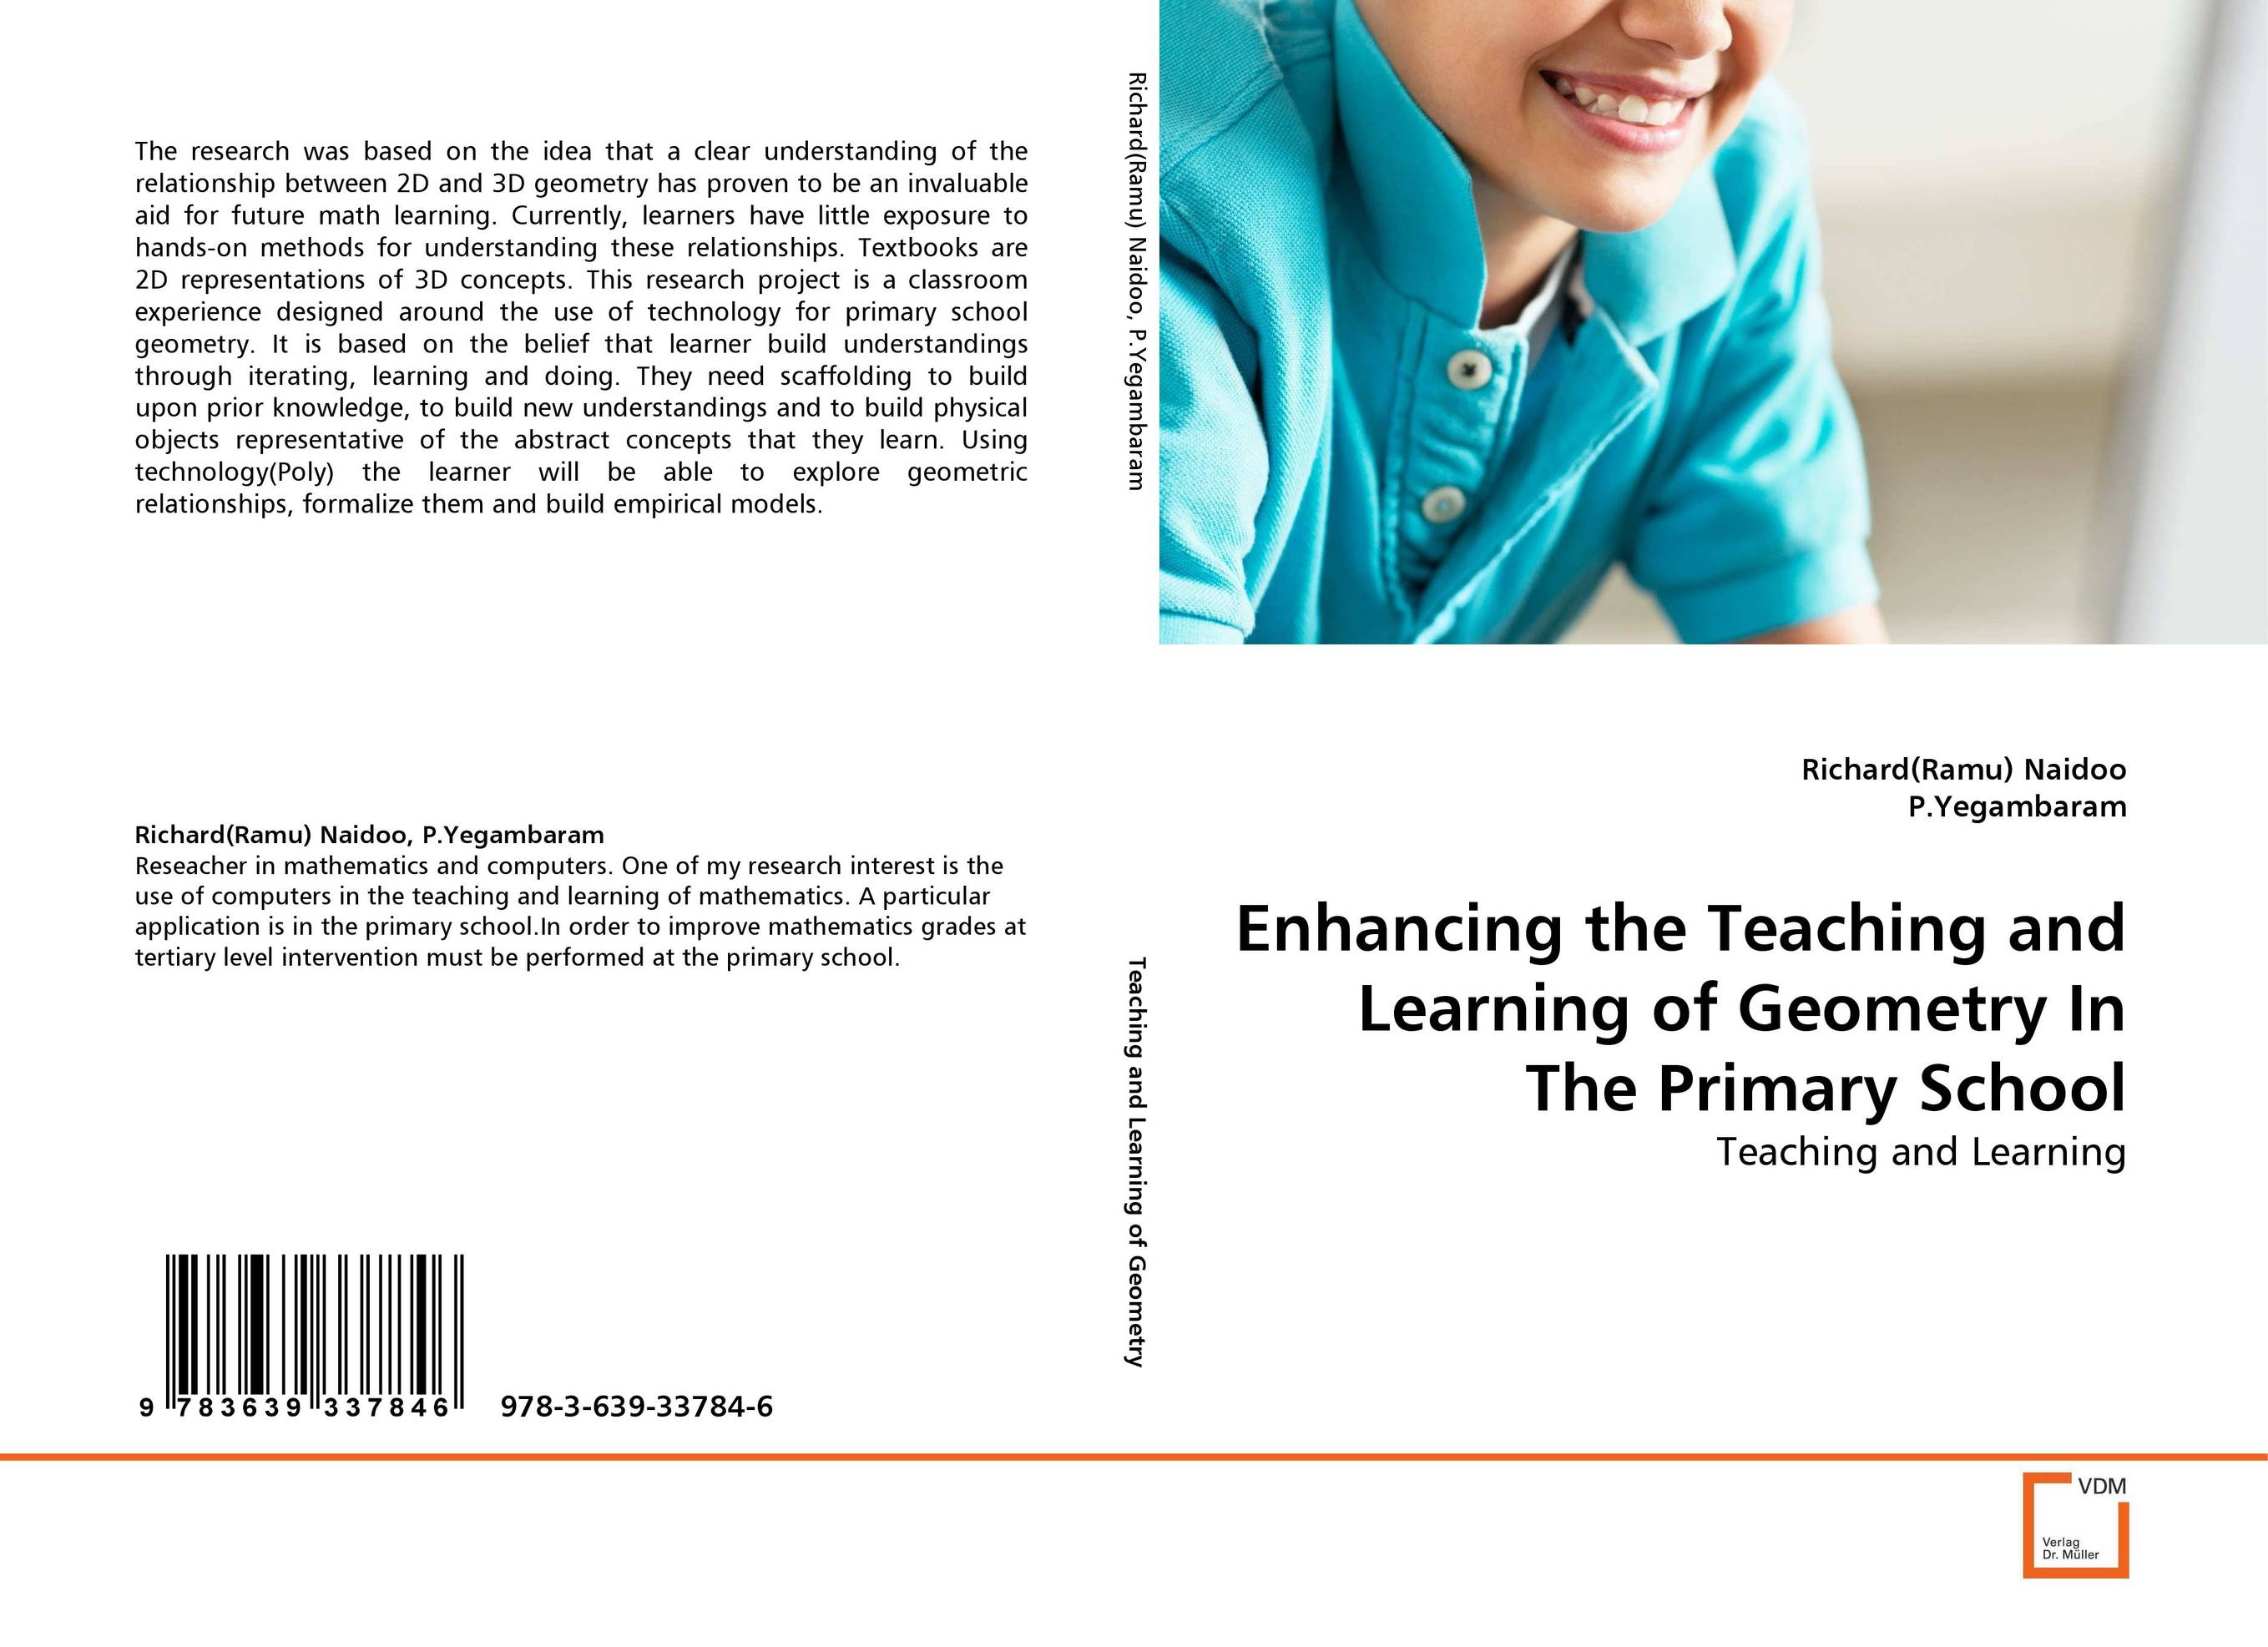 Enhancing the Teaching and Learning of Geometry In The Primary School